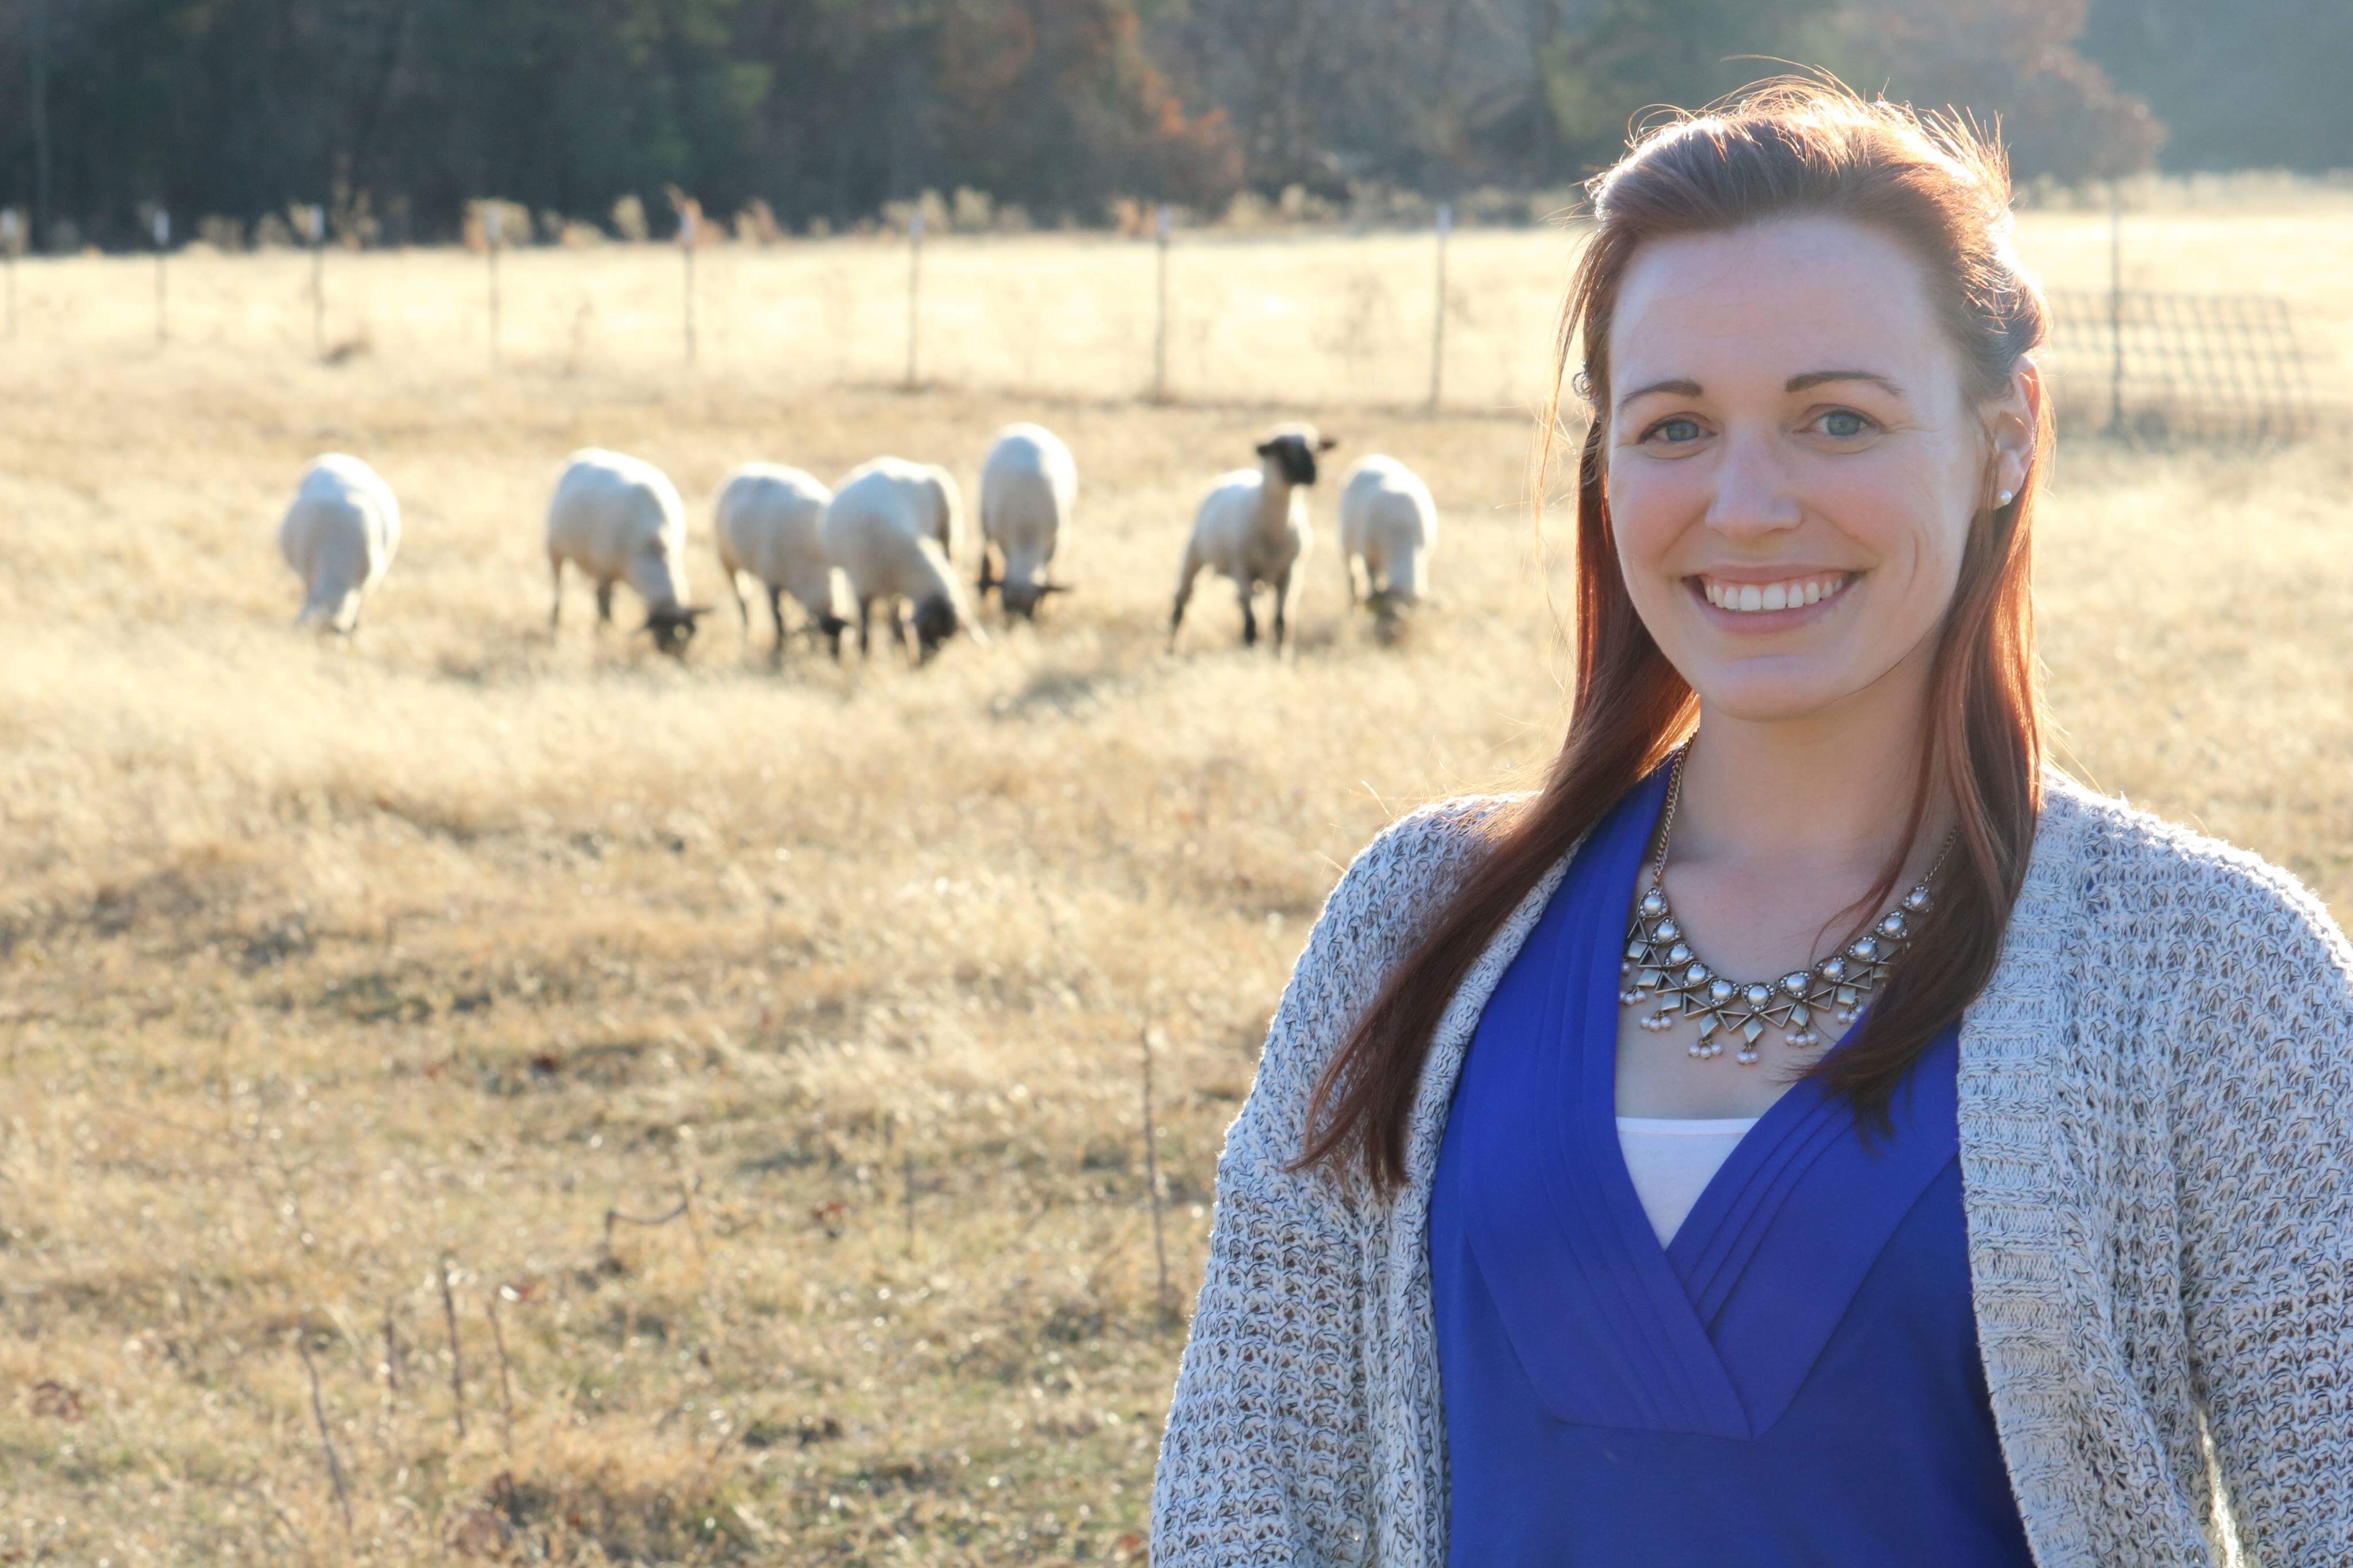 Nikki Schuth-Mitchell of Durant, OK Named a Significant Woman in Oklahoma Agriculture by ODAFF